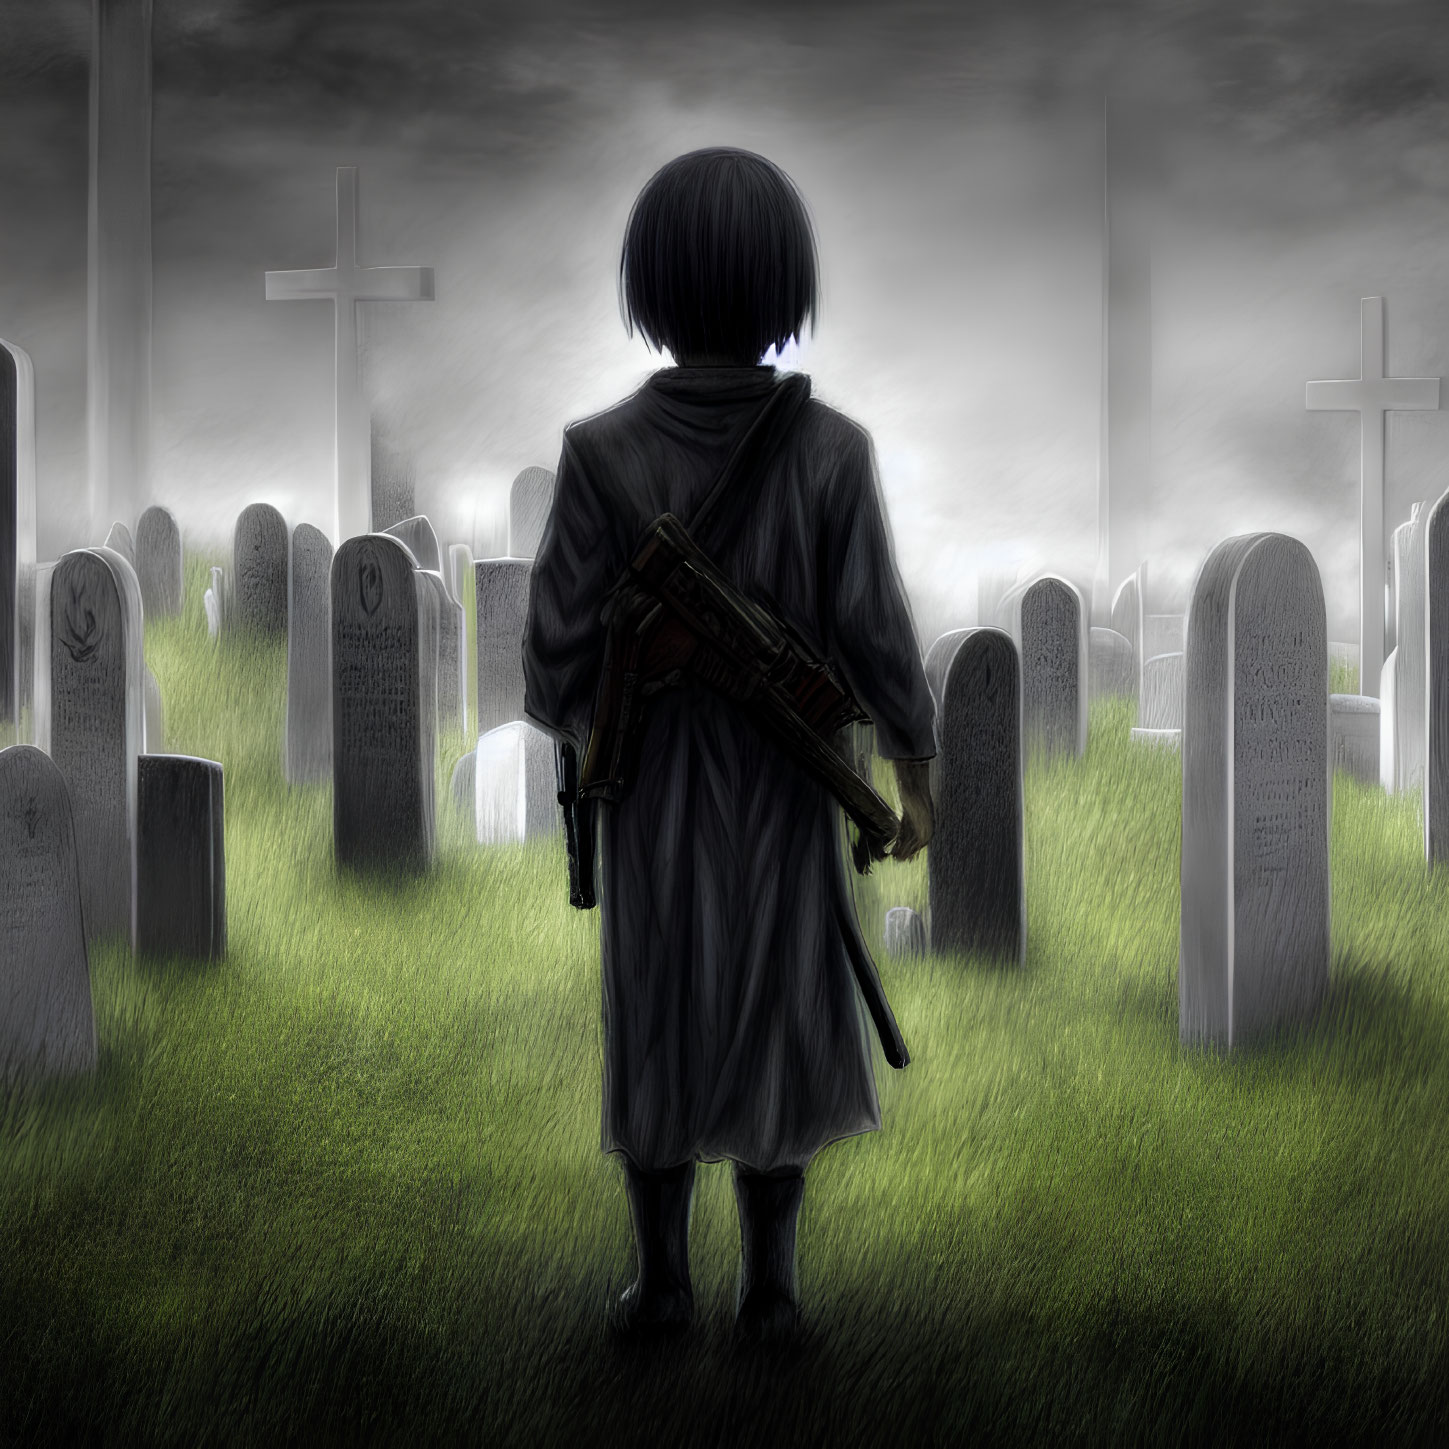 Figure with bob haircut in foggy cemetery holding rifle among tombstones.